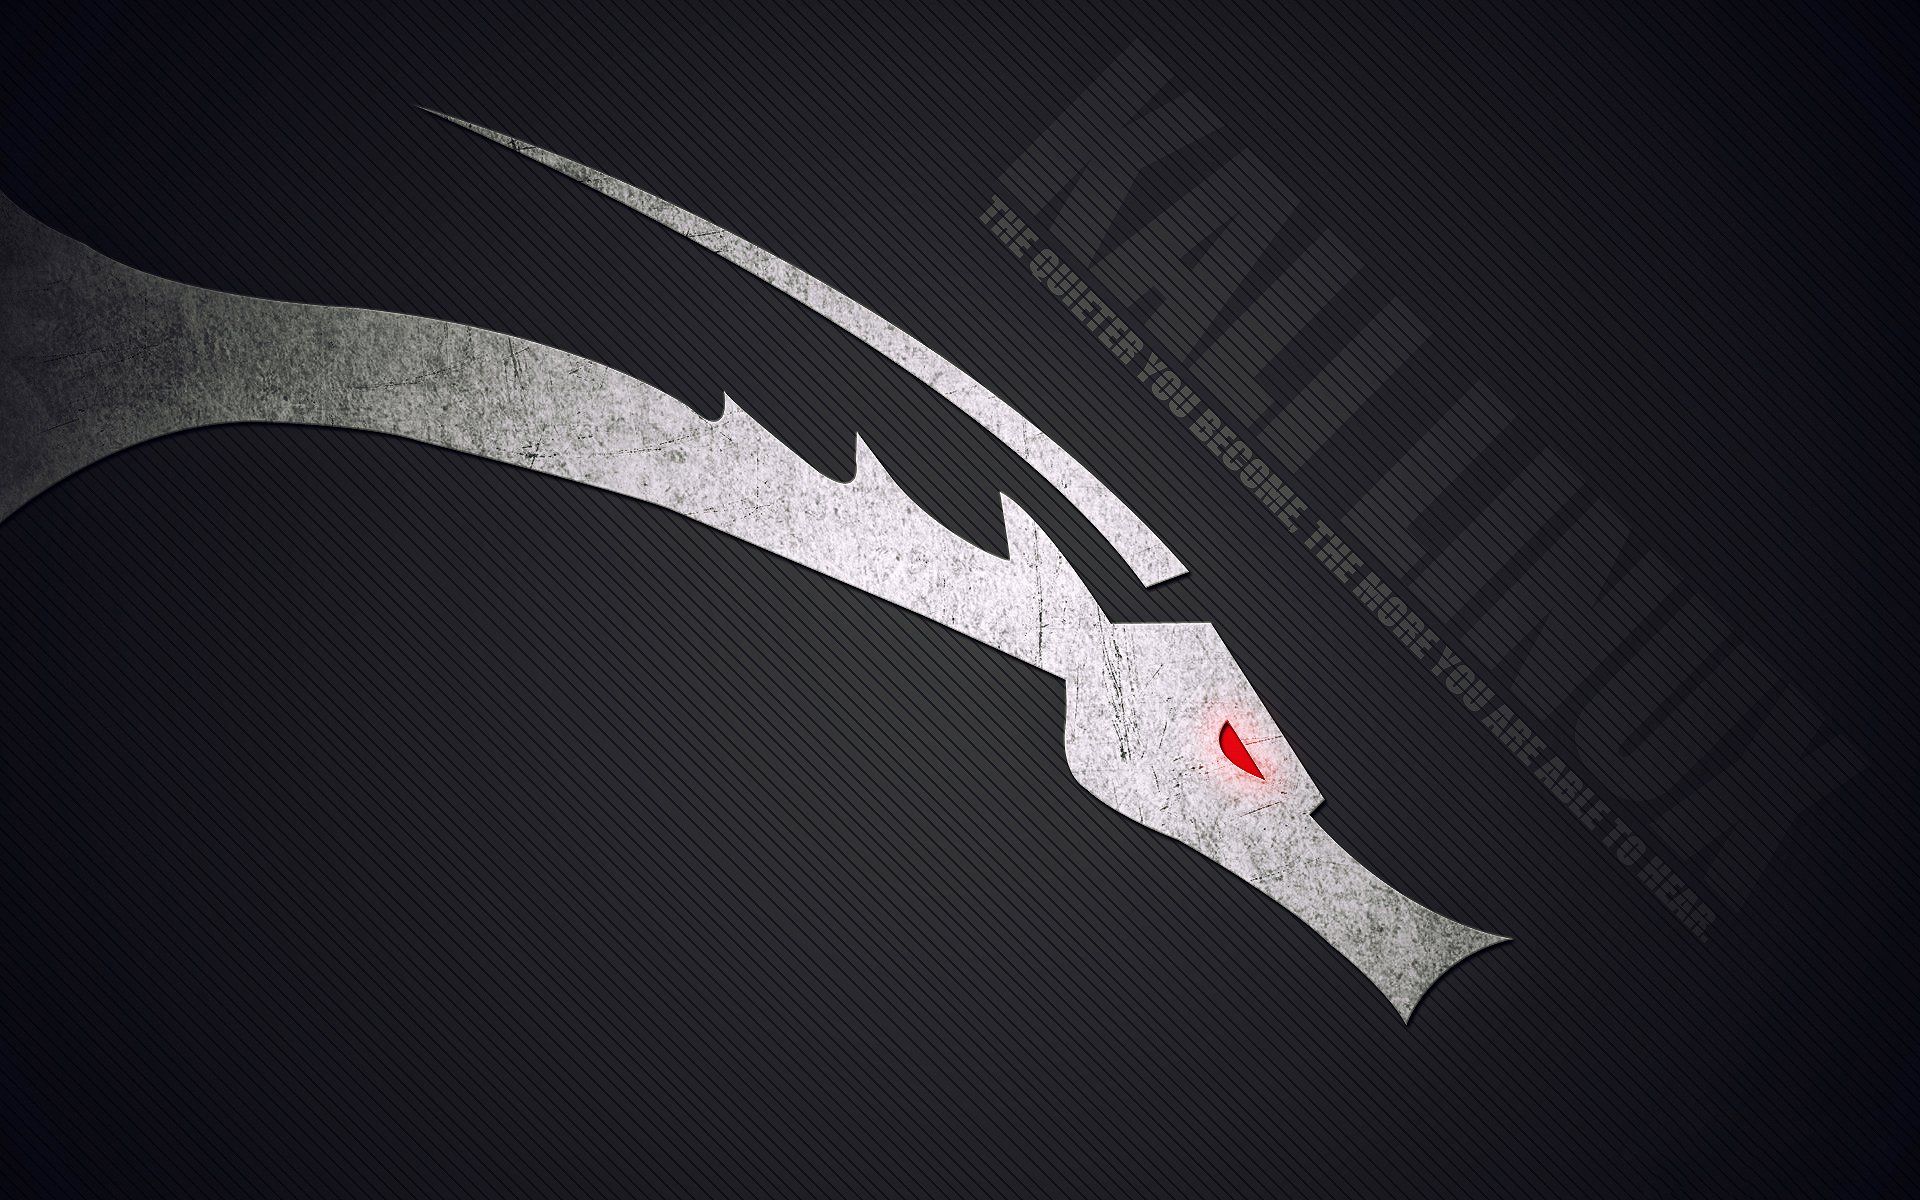 Kali Linux Wallpapers – The Linux Terminal – Linux tutorials ...